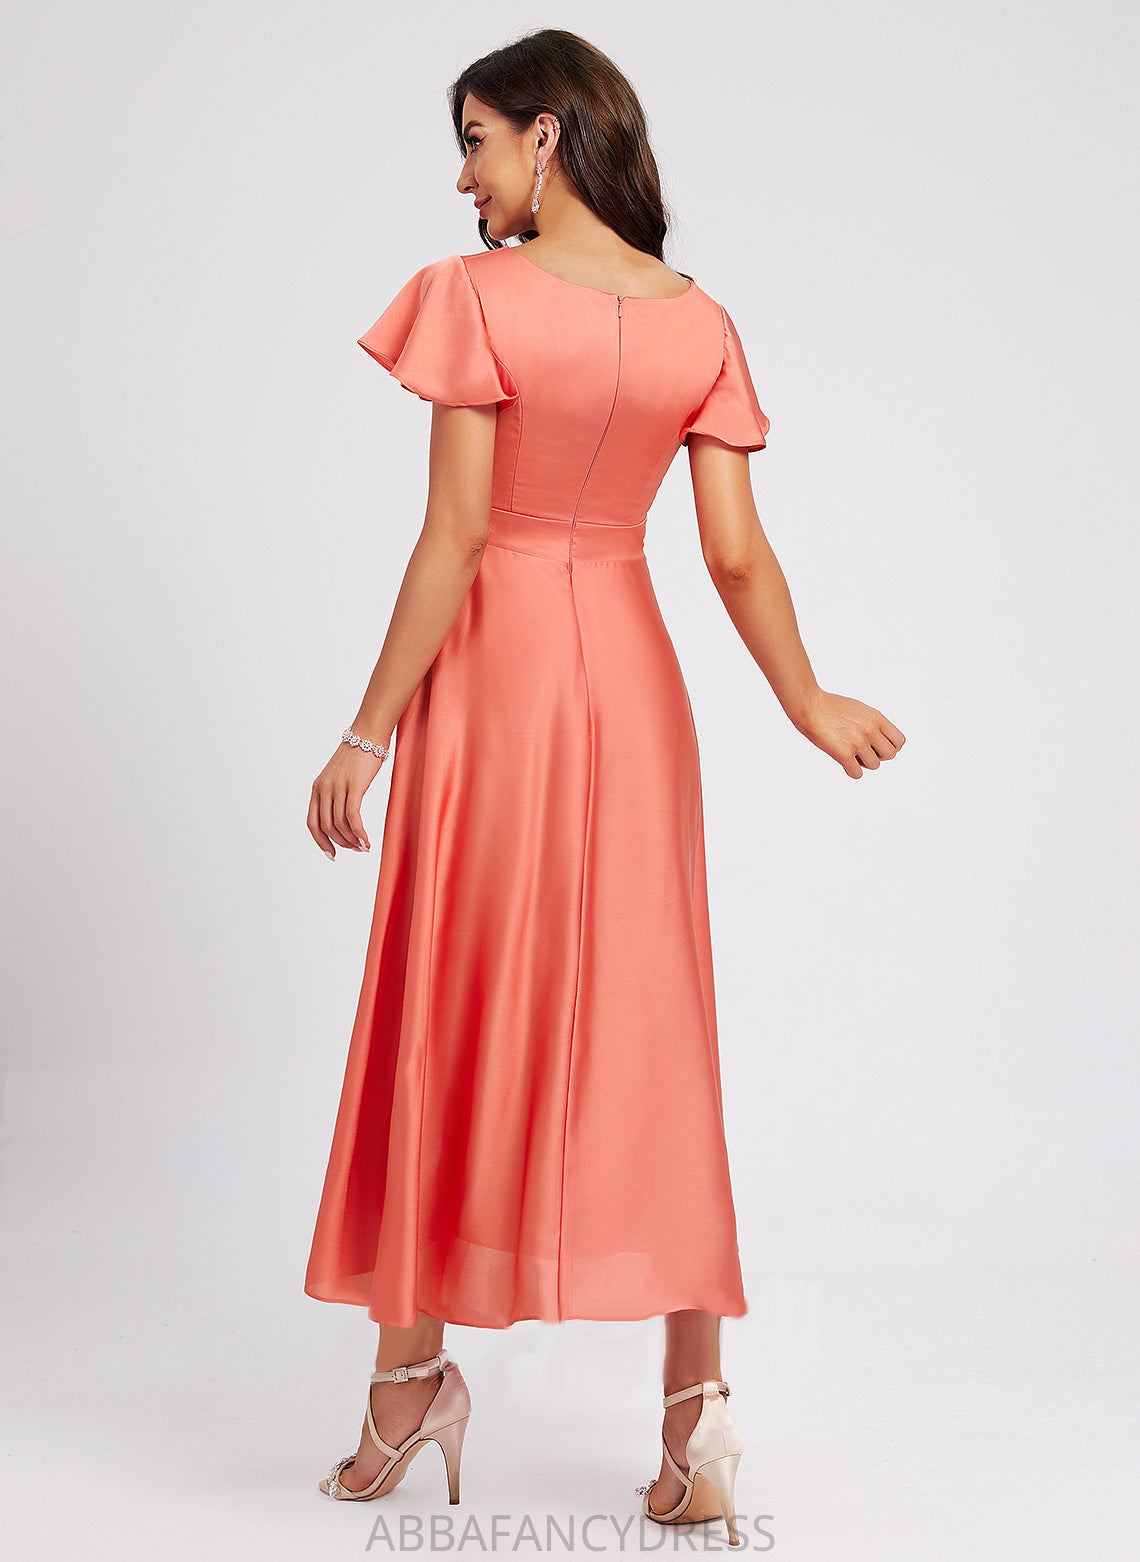 Dress A-Line Cocktail Dresses Cocktail Pleated Scoop Stephanie Polyester Neck Asymmetrical With